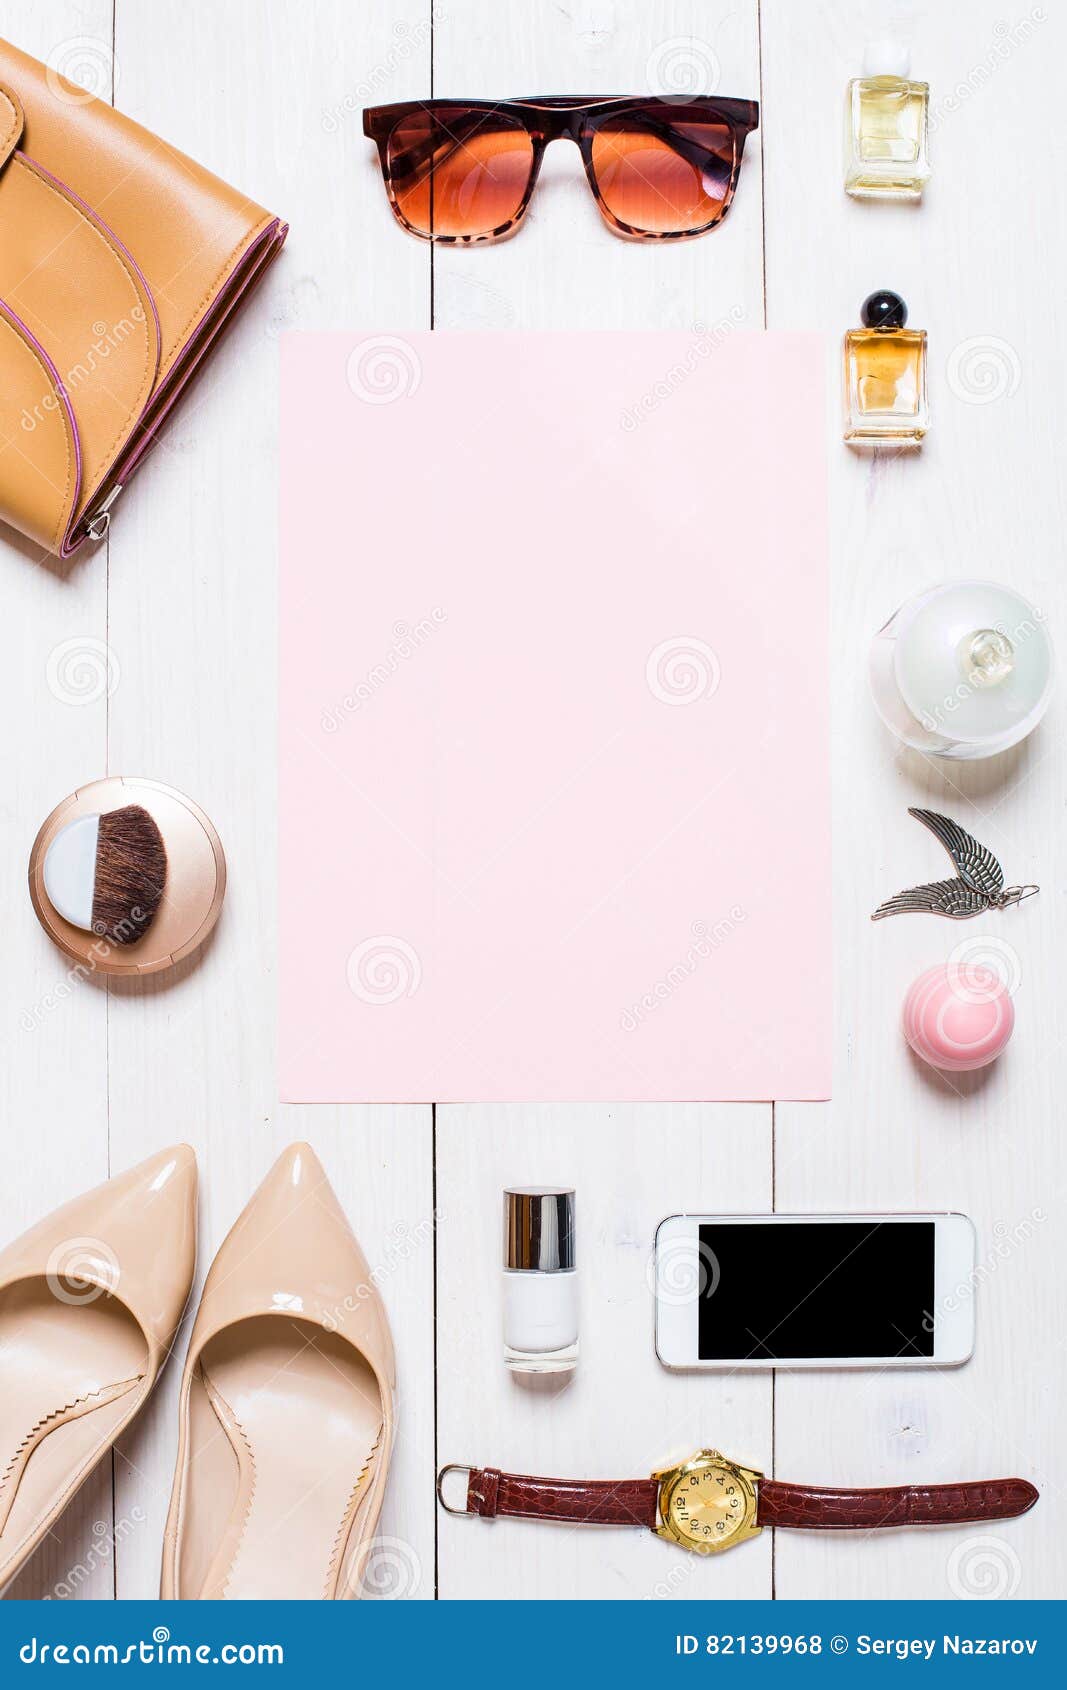 Women S Clothes and Accessories on a White Background Stock Photo ...